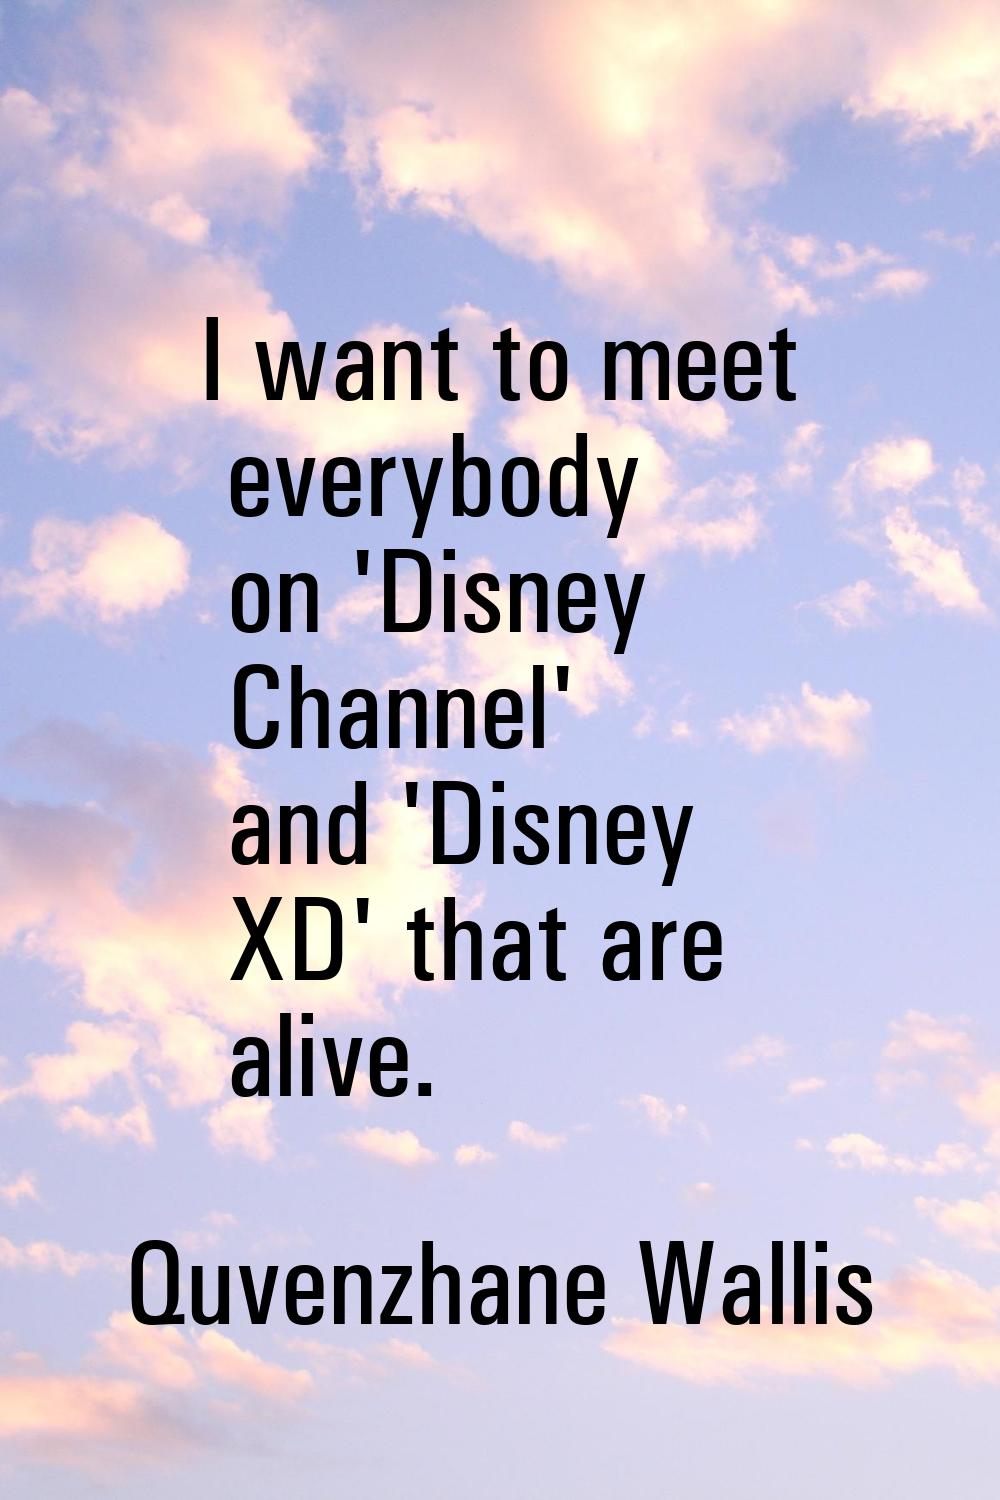 I want to meet everybody on 'Disney Channel' and 'Disney XD' that are alive.